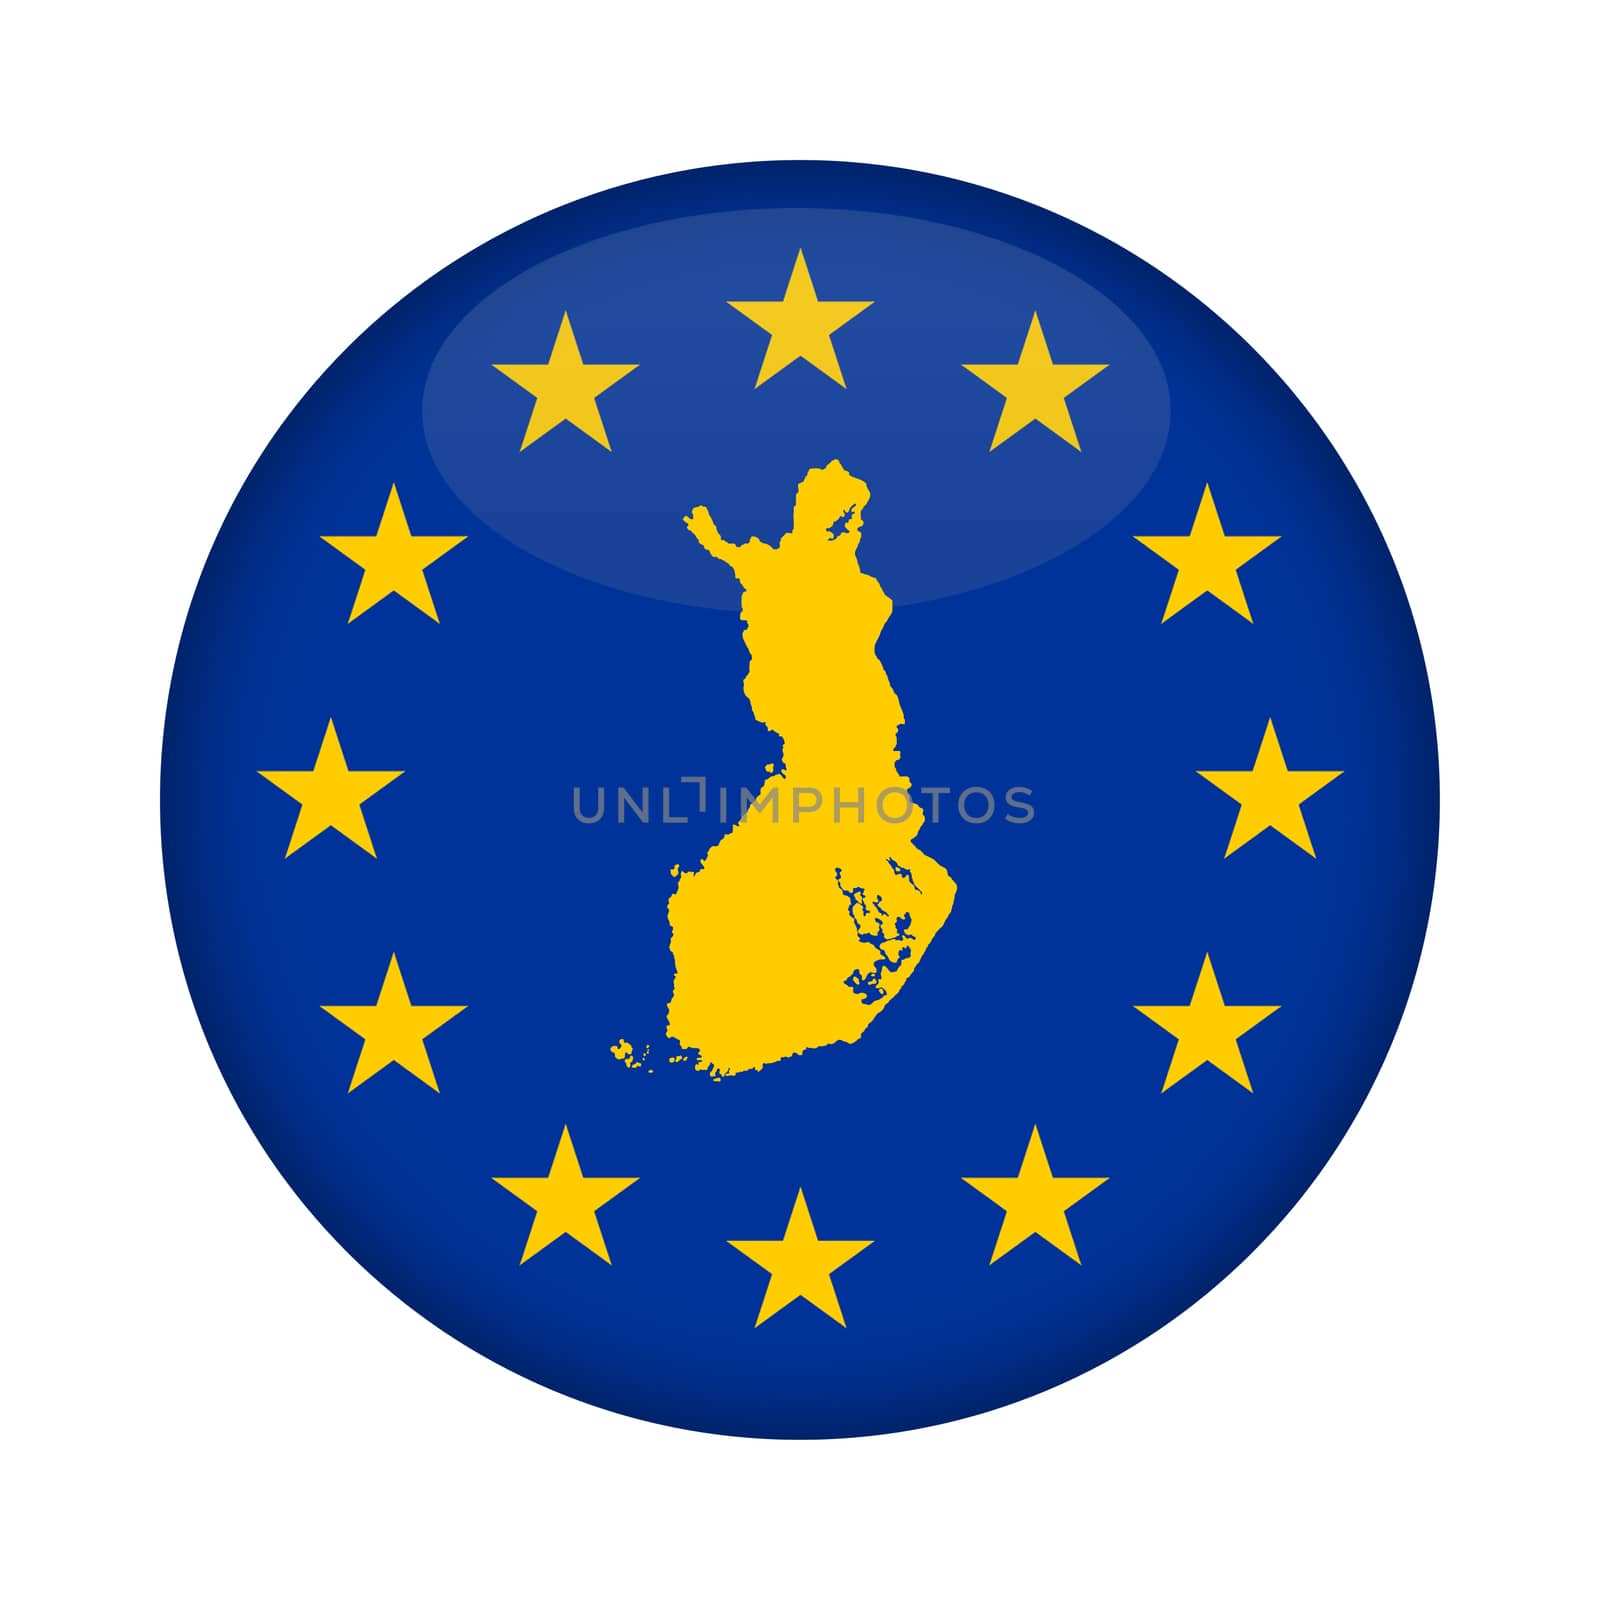 Finland map on a European Union flag button isolated on a white background.